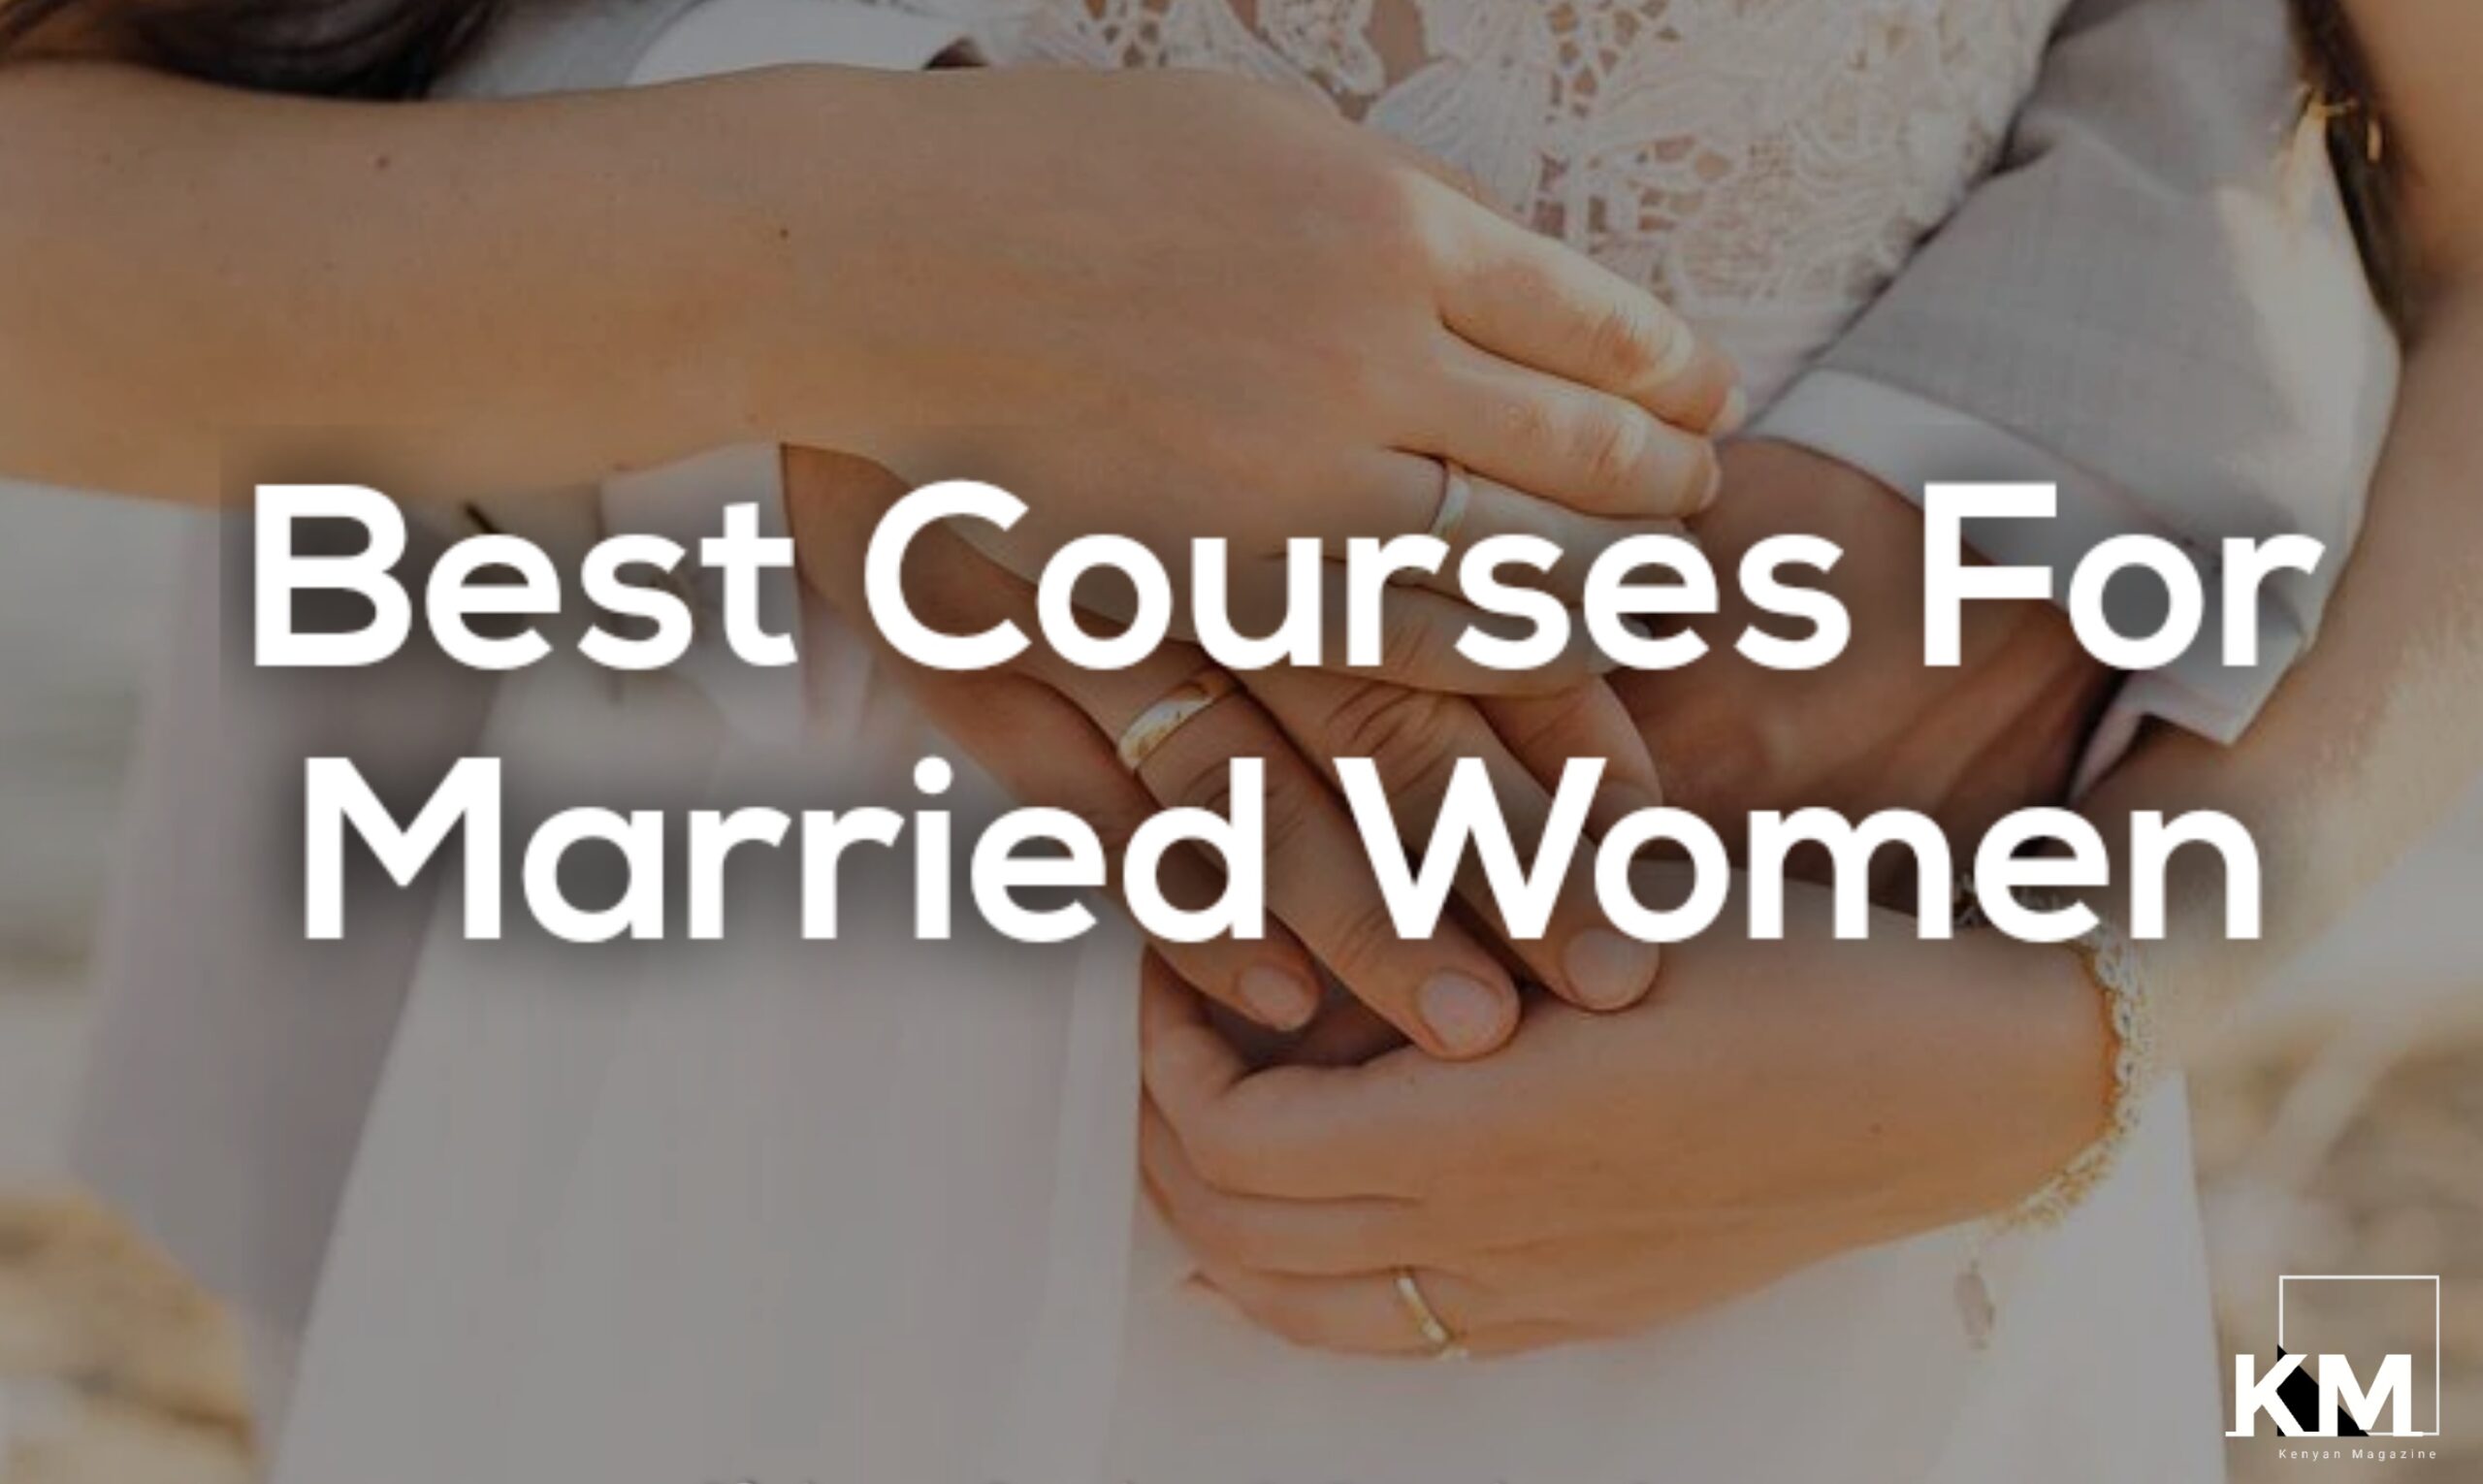 Best courses for housewives